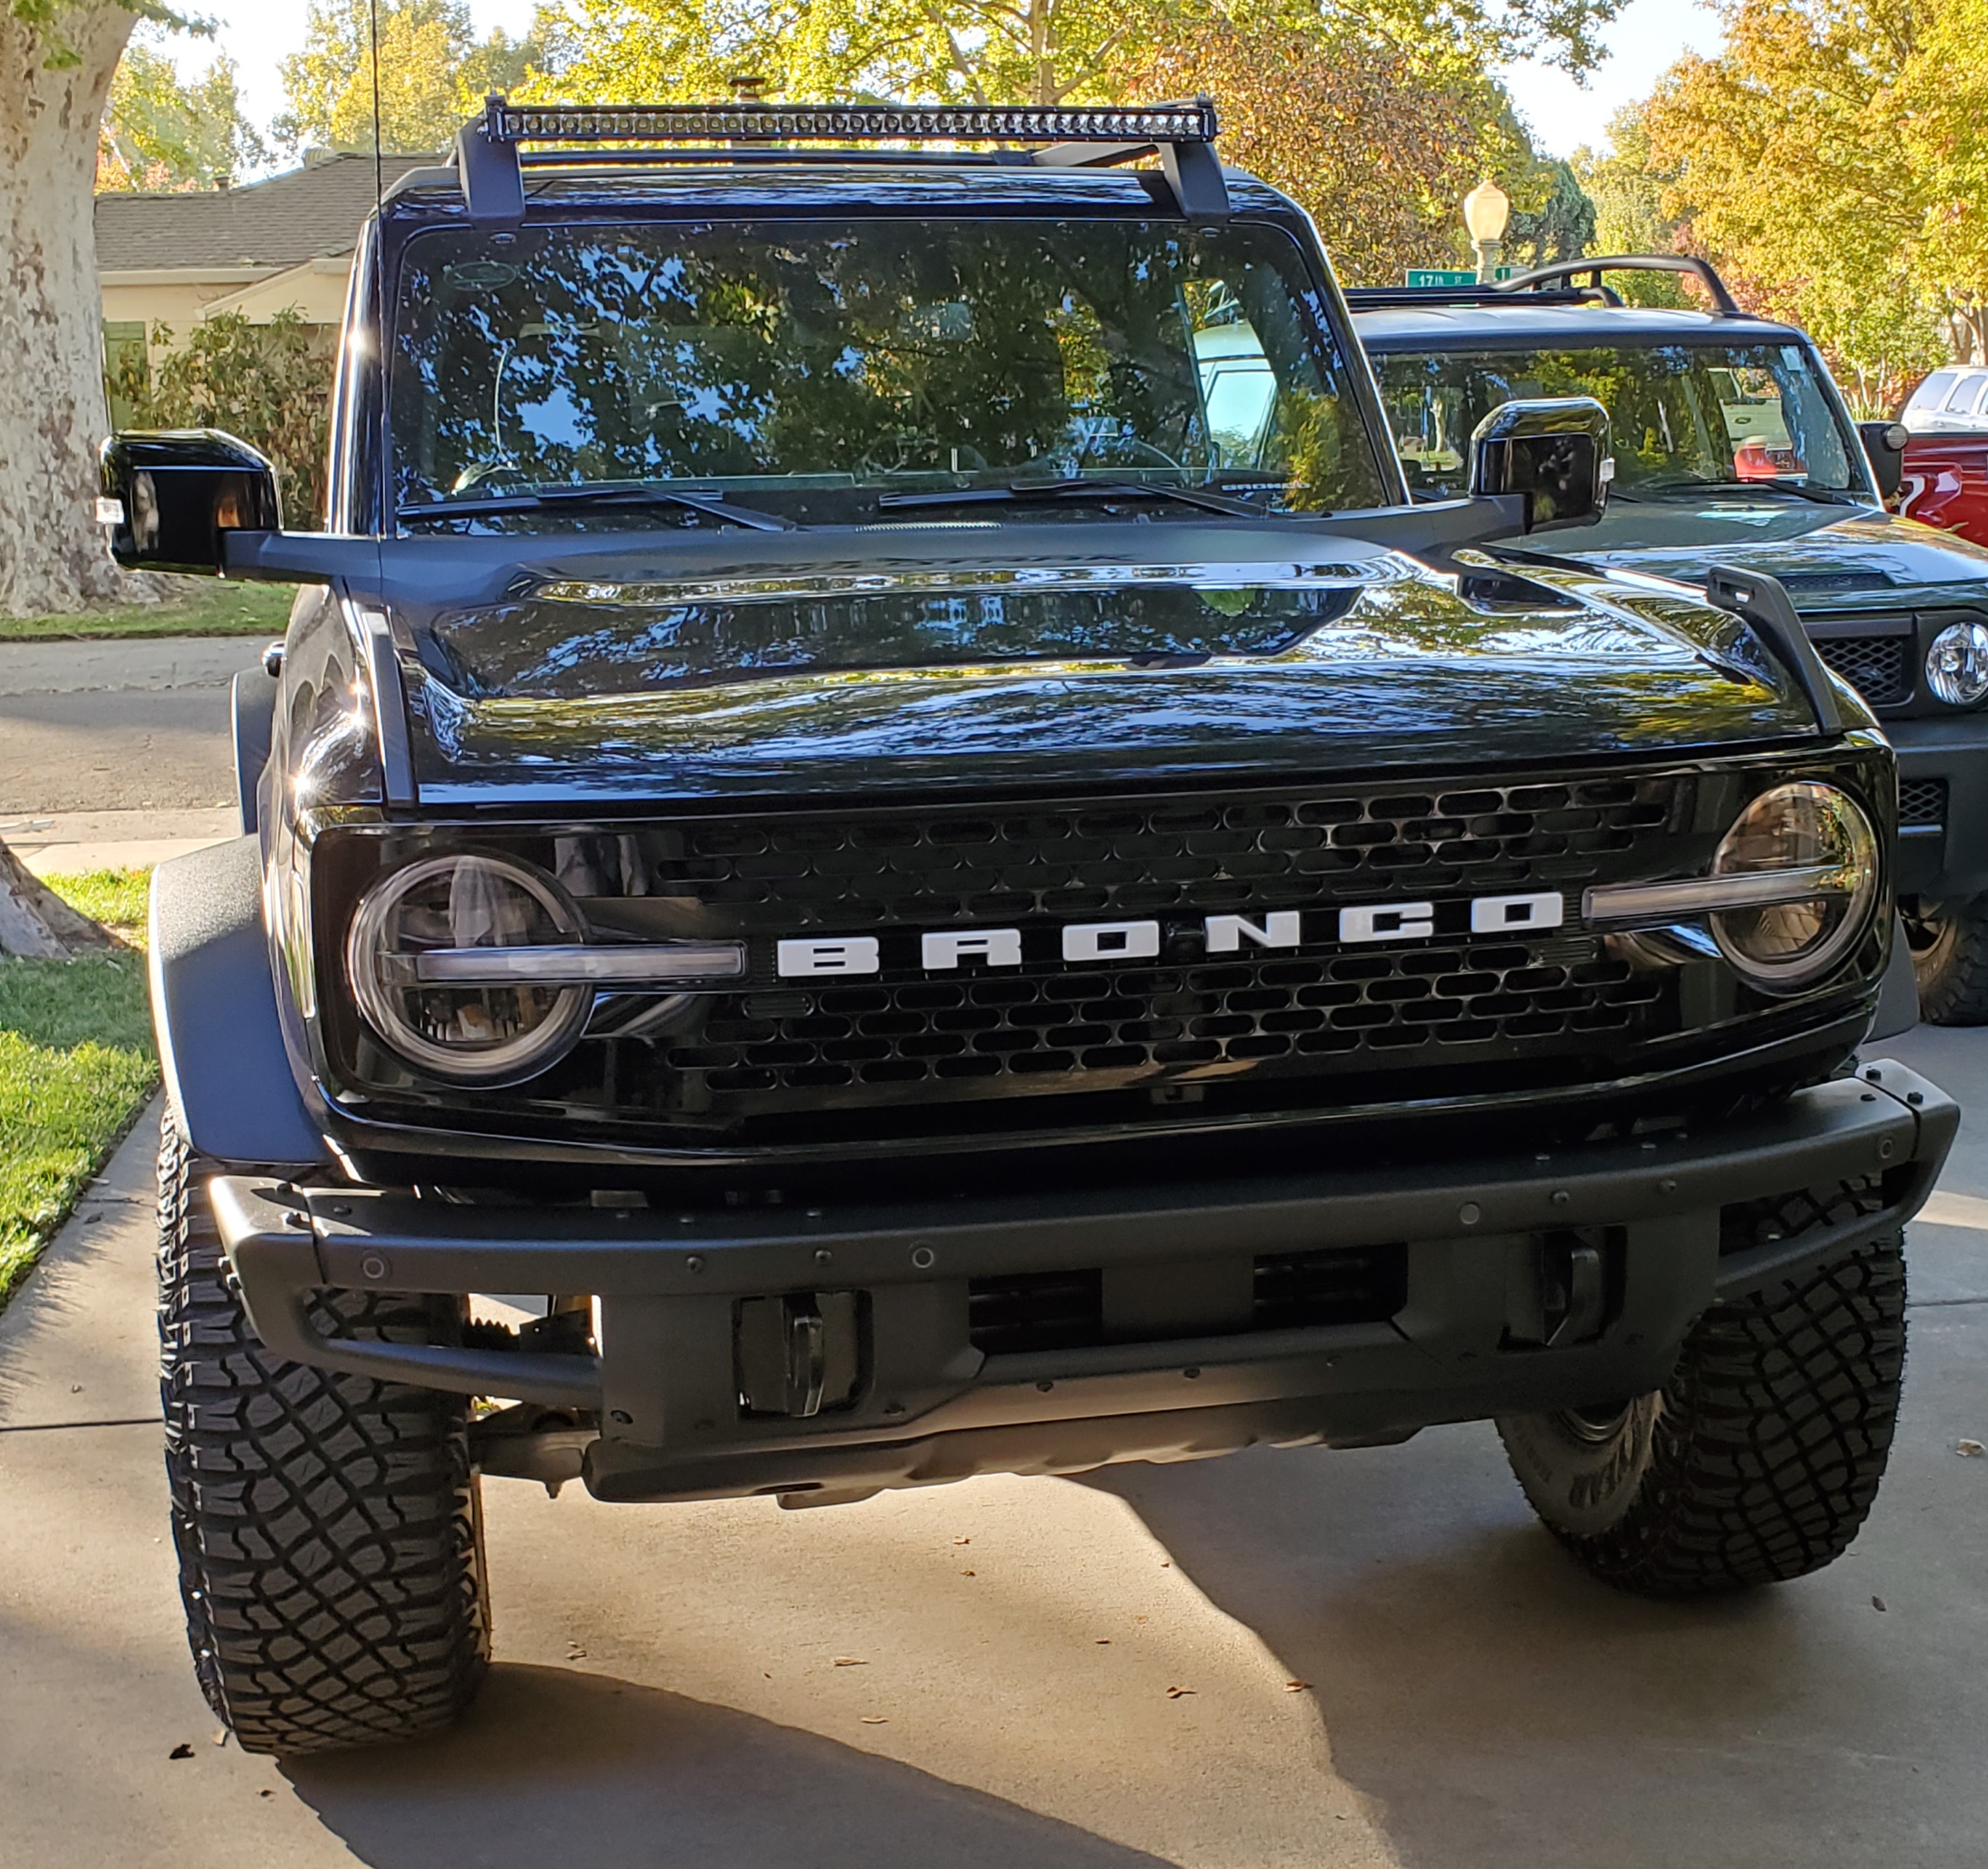 Ford Bronco 2 Door Broncos - What’s on your roof racks? [Photos Thread] 20211015_170600